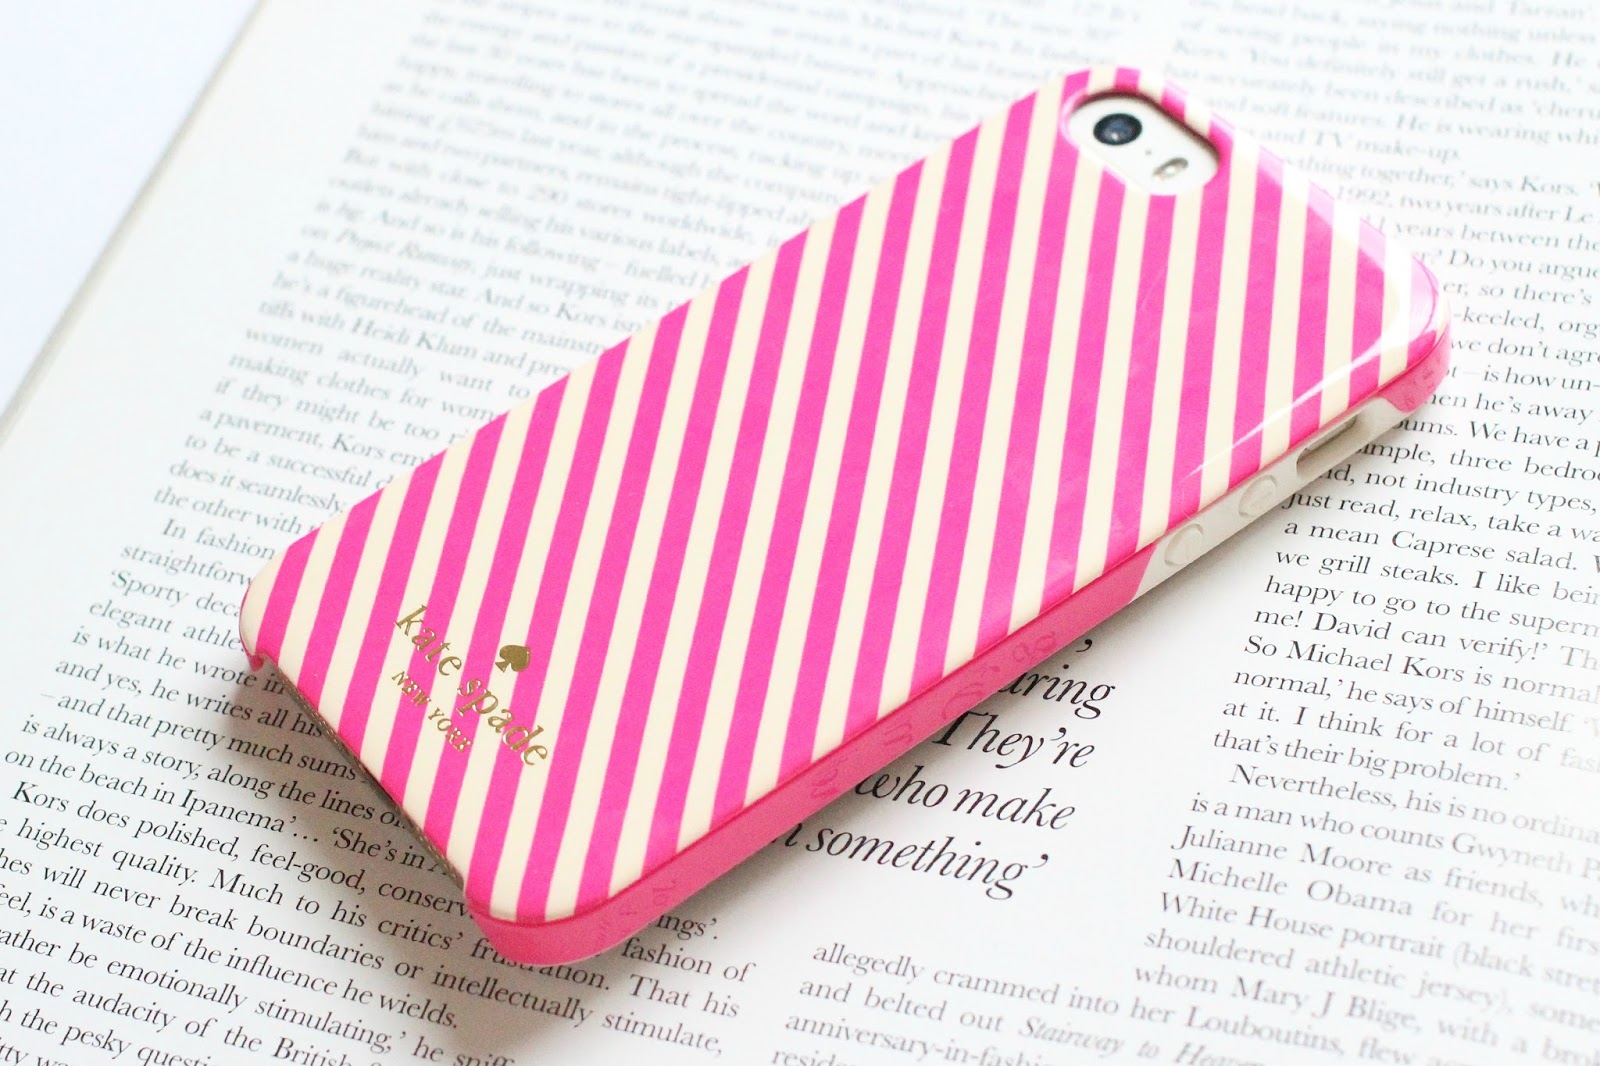 KATE SPADE IPHONE 5S CASE. | At Number 43